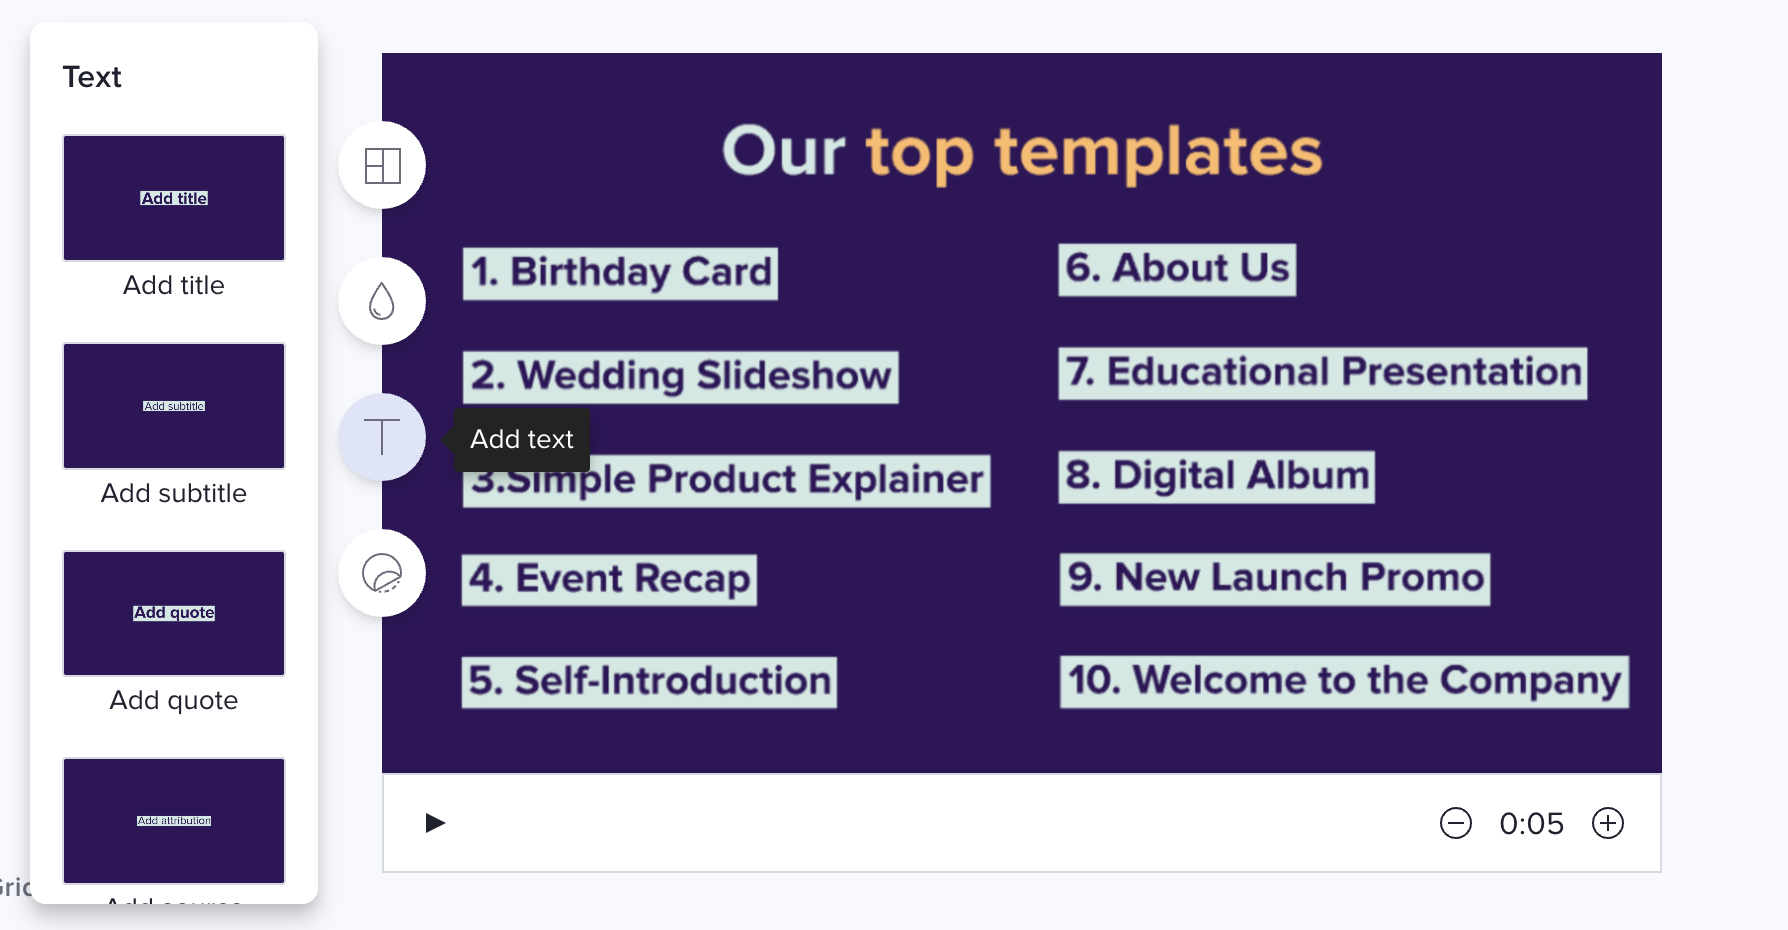 New Animoto feature: Add up to ten text boxes